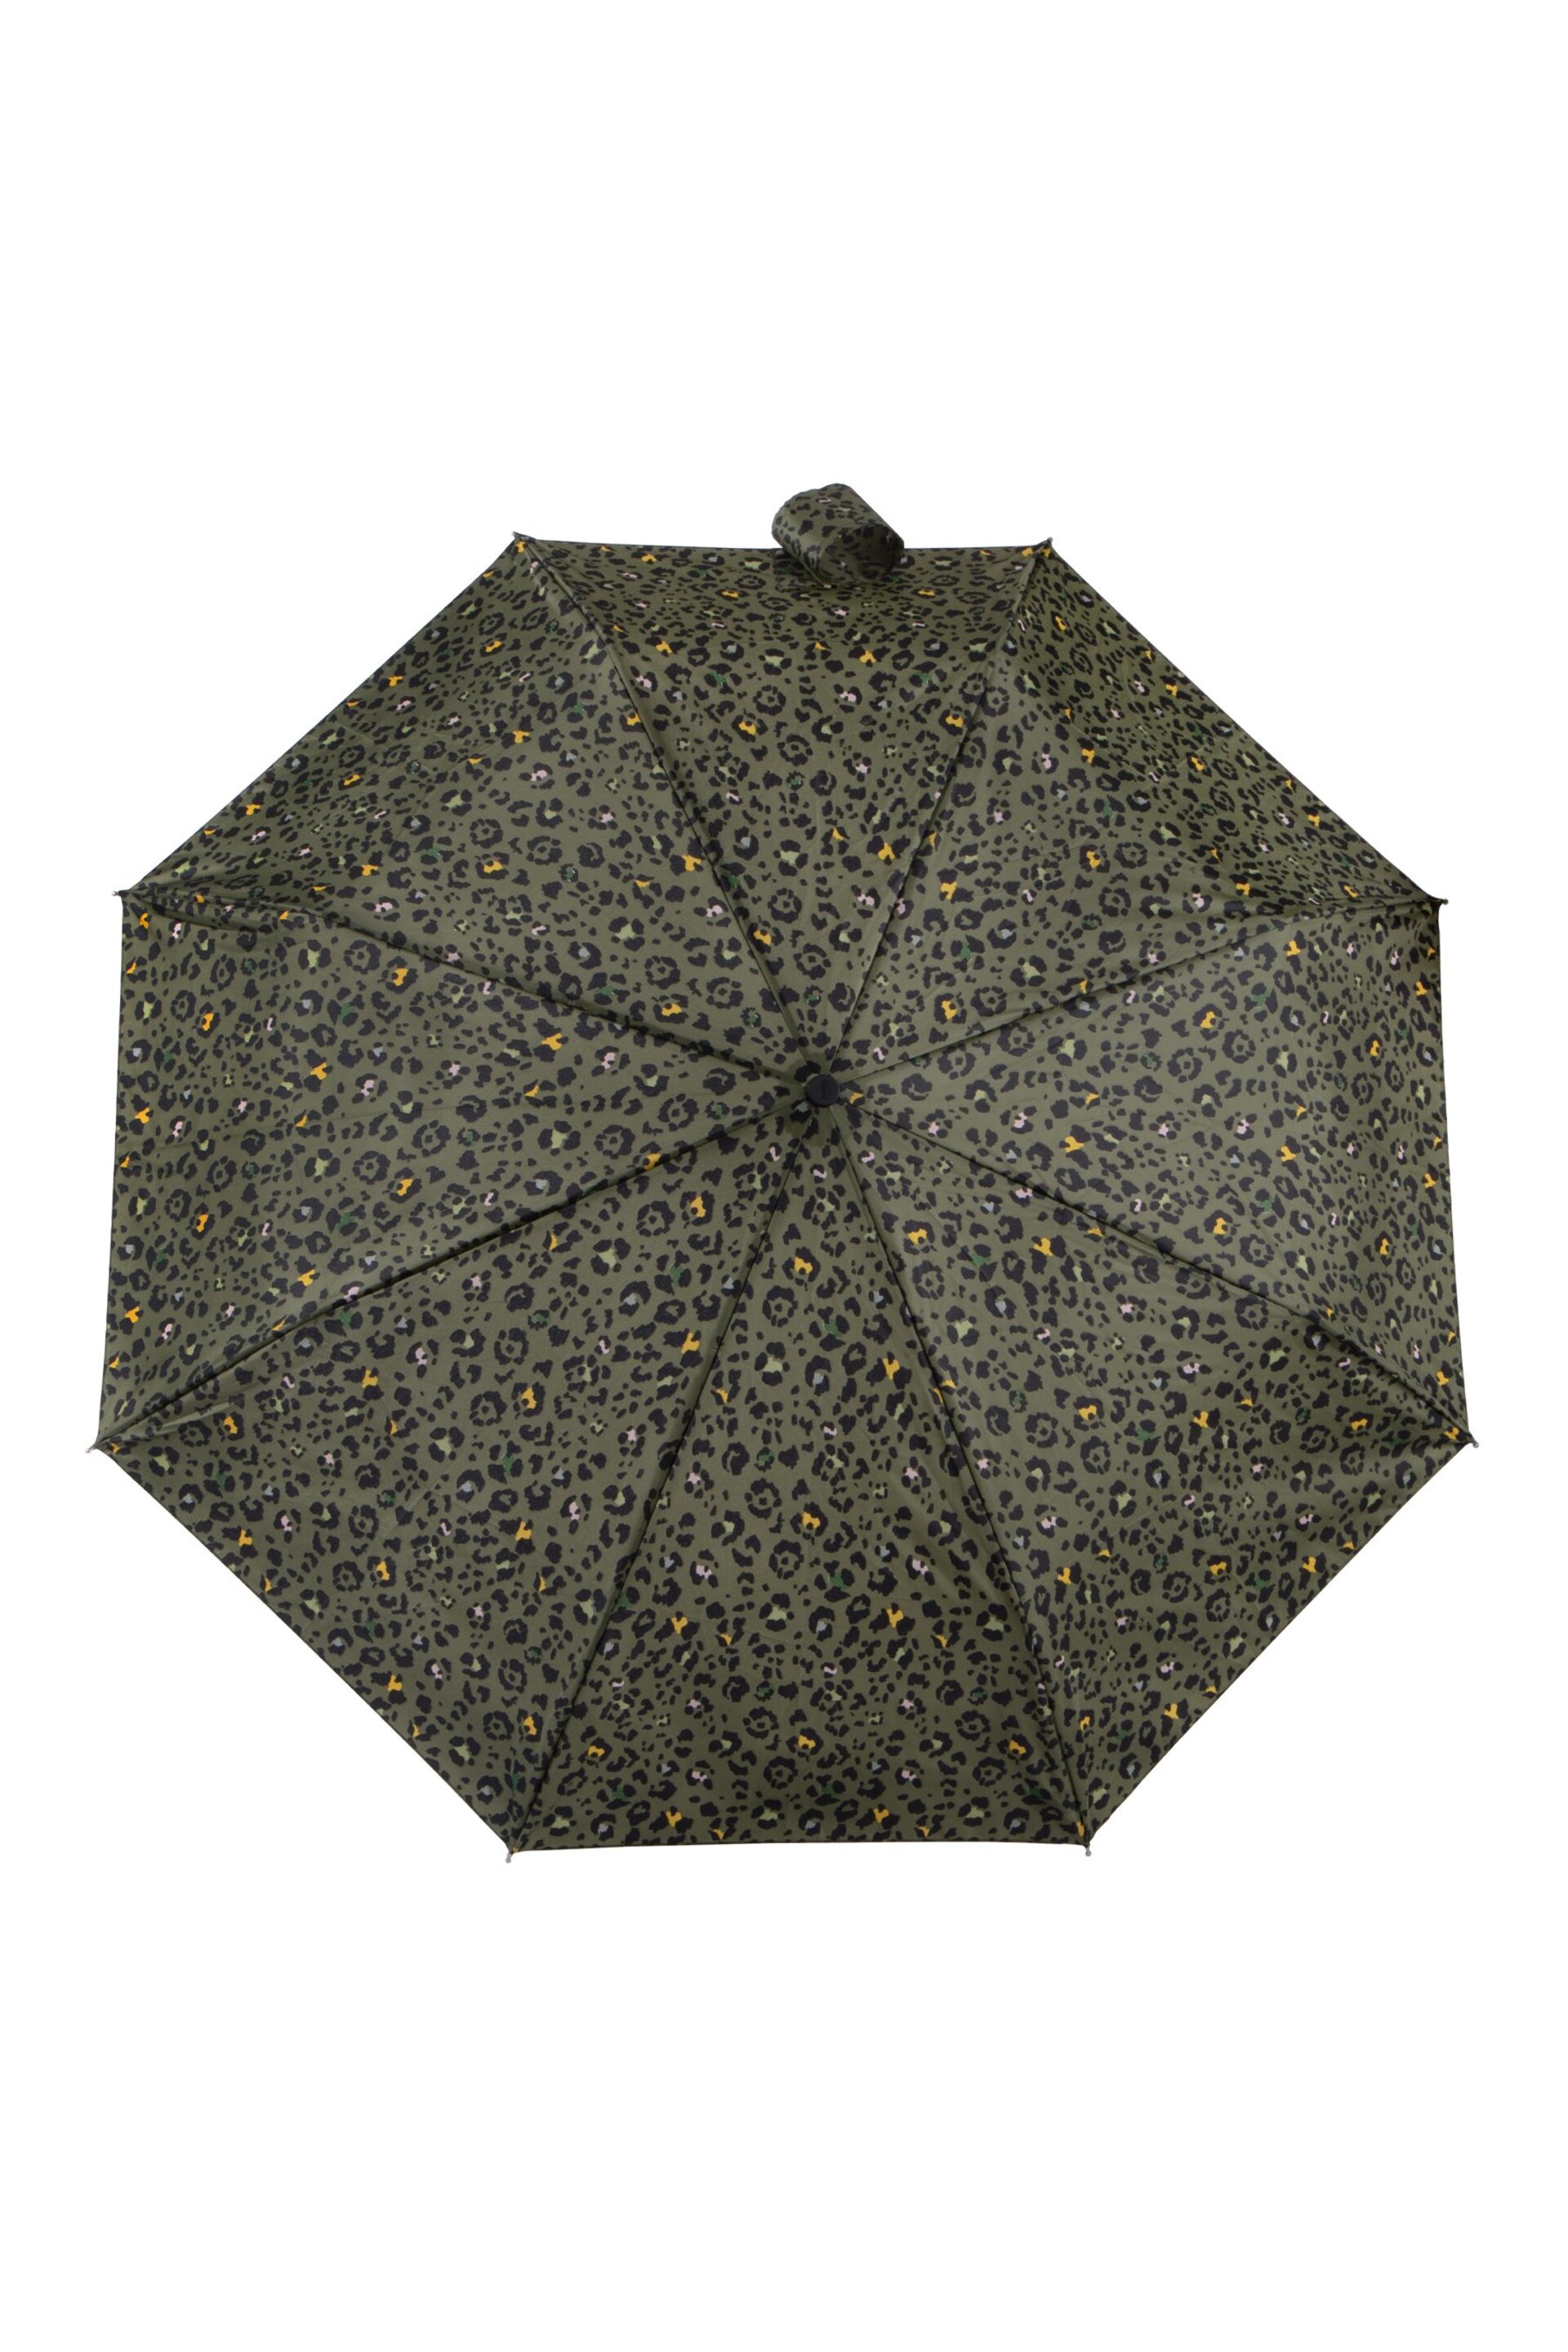 Totes Green Eco Xtra Strong Auto Open/Close Panther Print Umbrella - Image 2 of 4